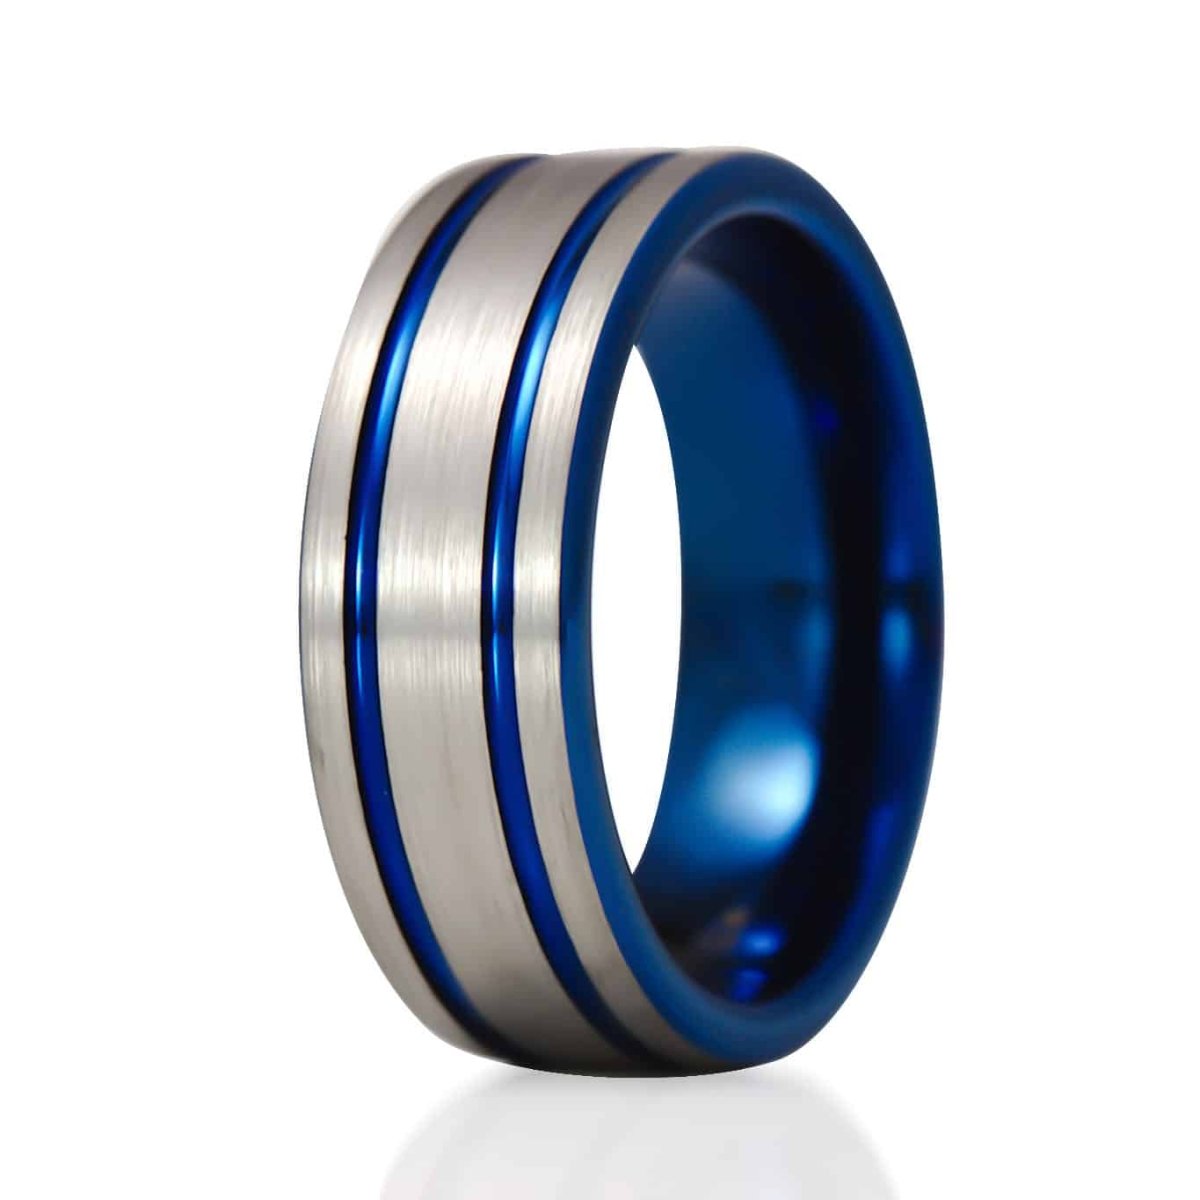 The Jester | Striped Center Silver and Blue Ring | Gentlemen's Bands 